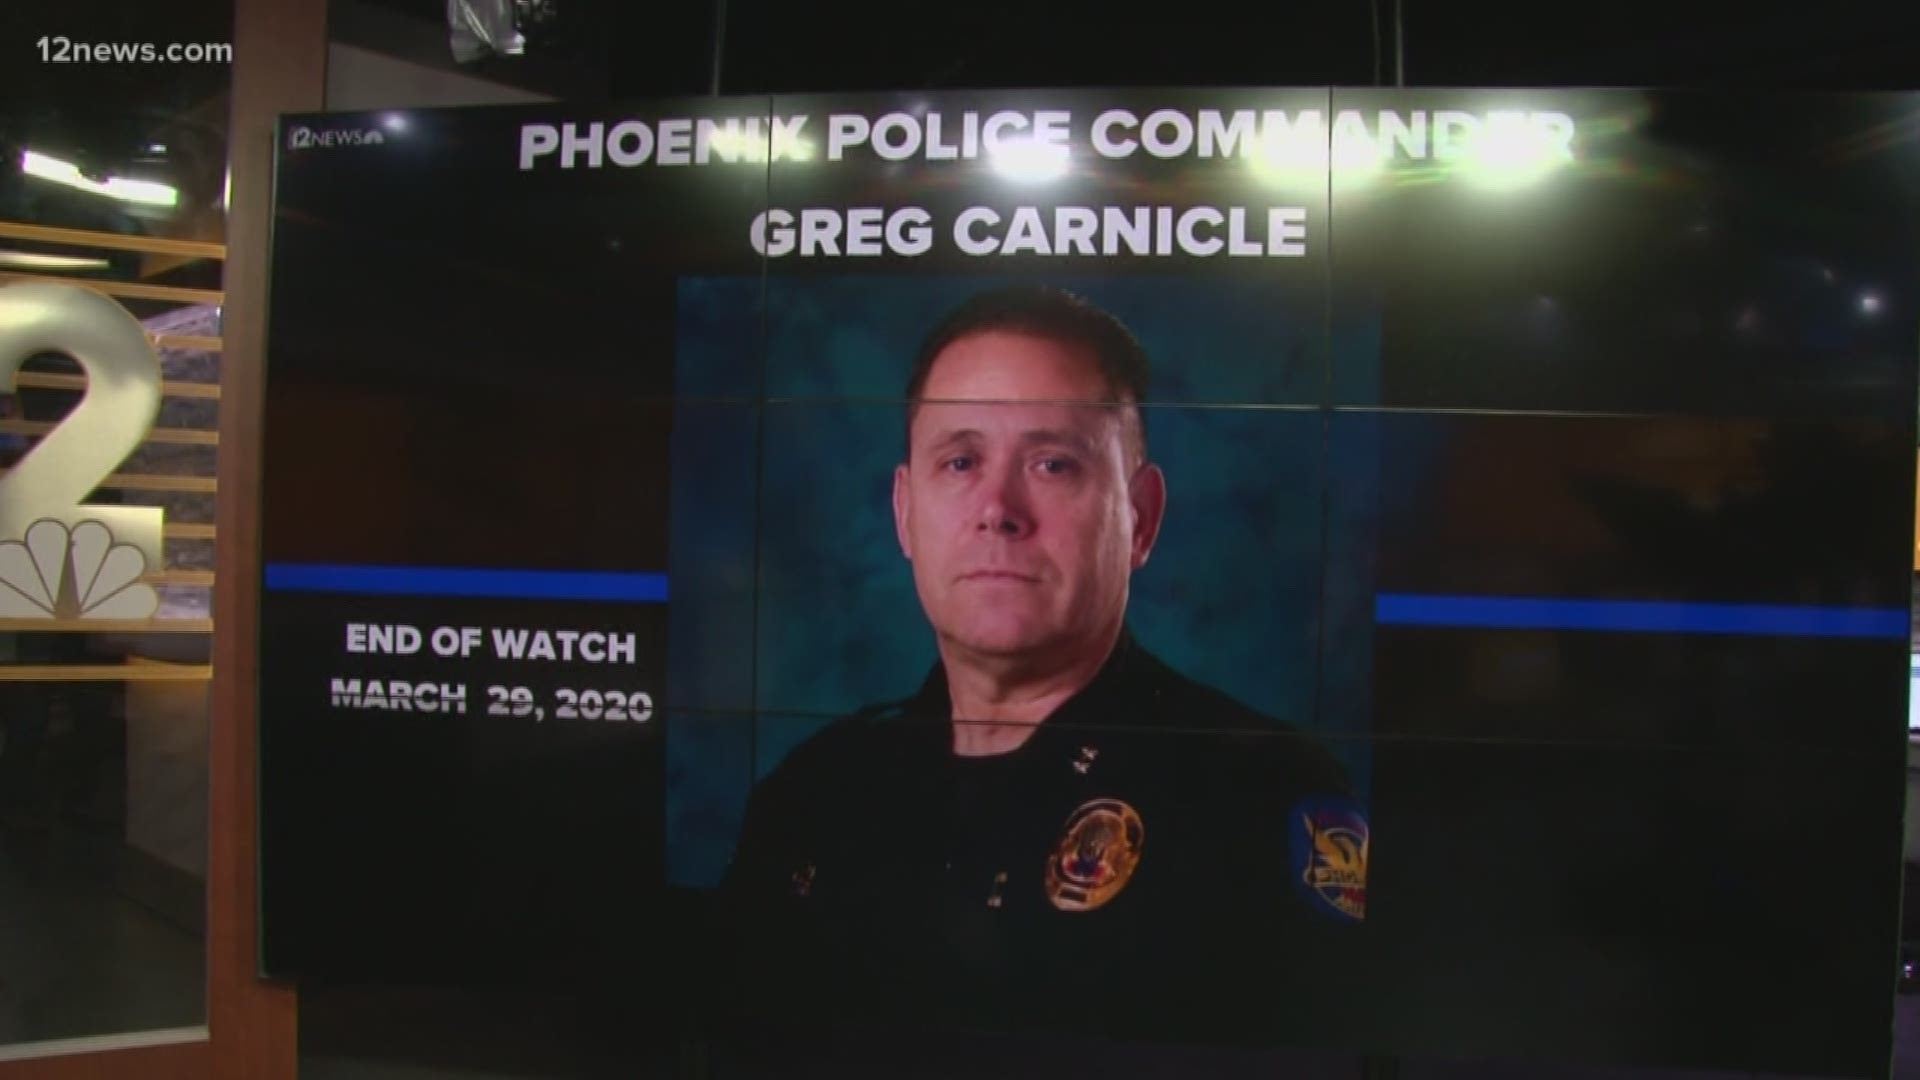 Team 12's Jen Wahl has the latest on the death of Phoenix Police Commander Greg Carnicle and the injuries of the other two officers.